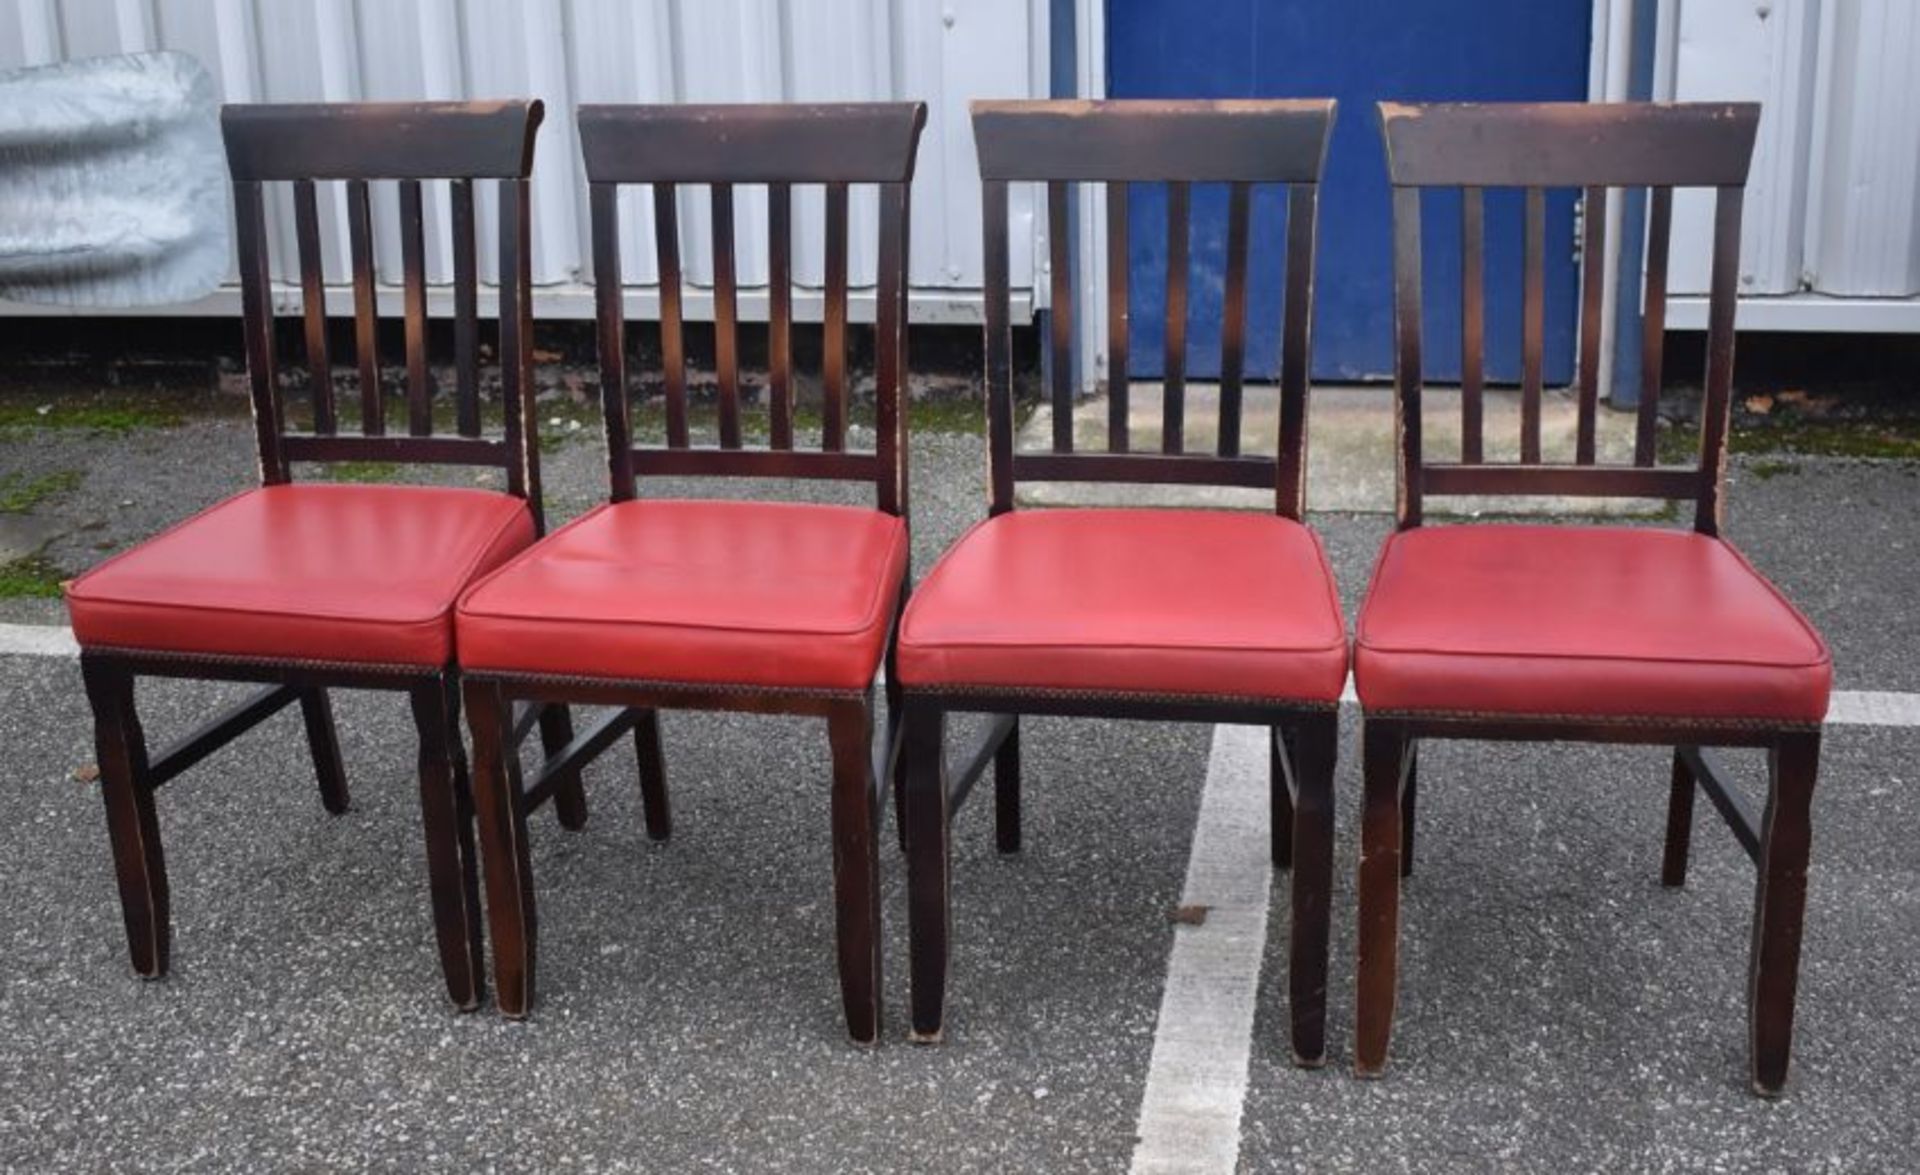 8 x Restaurant Dining Chairs With Dark Stained Wood Finish and Red Leather Seat Pads - Recently Remo - Image 2 of 6